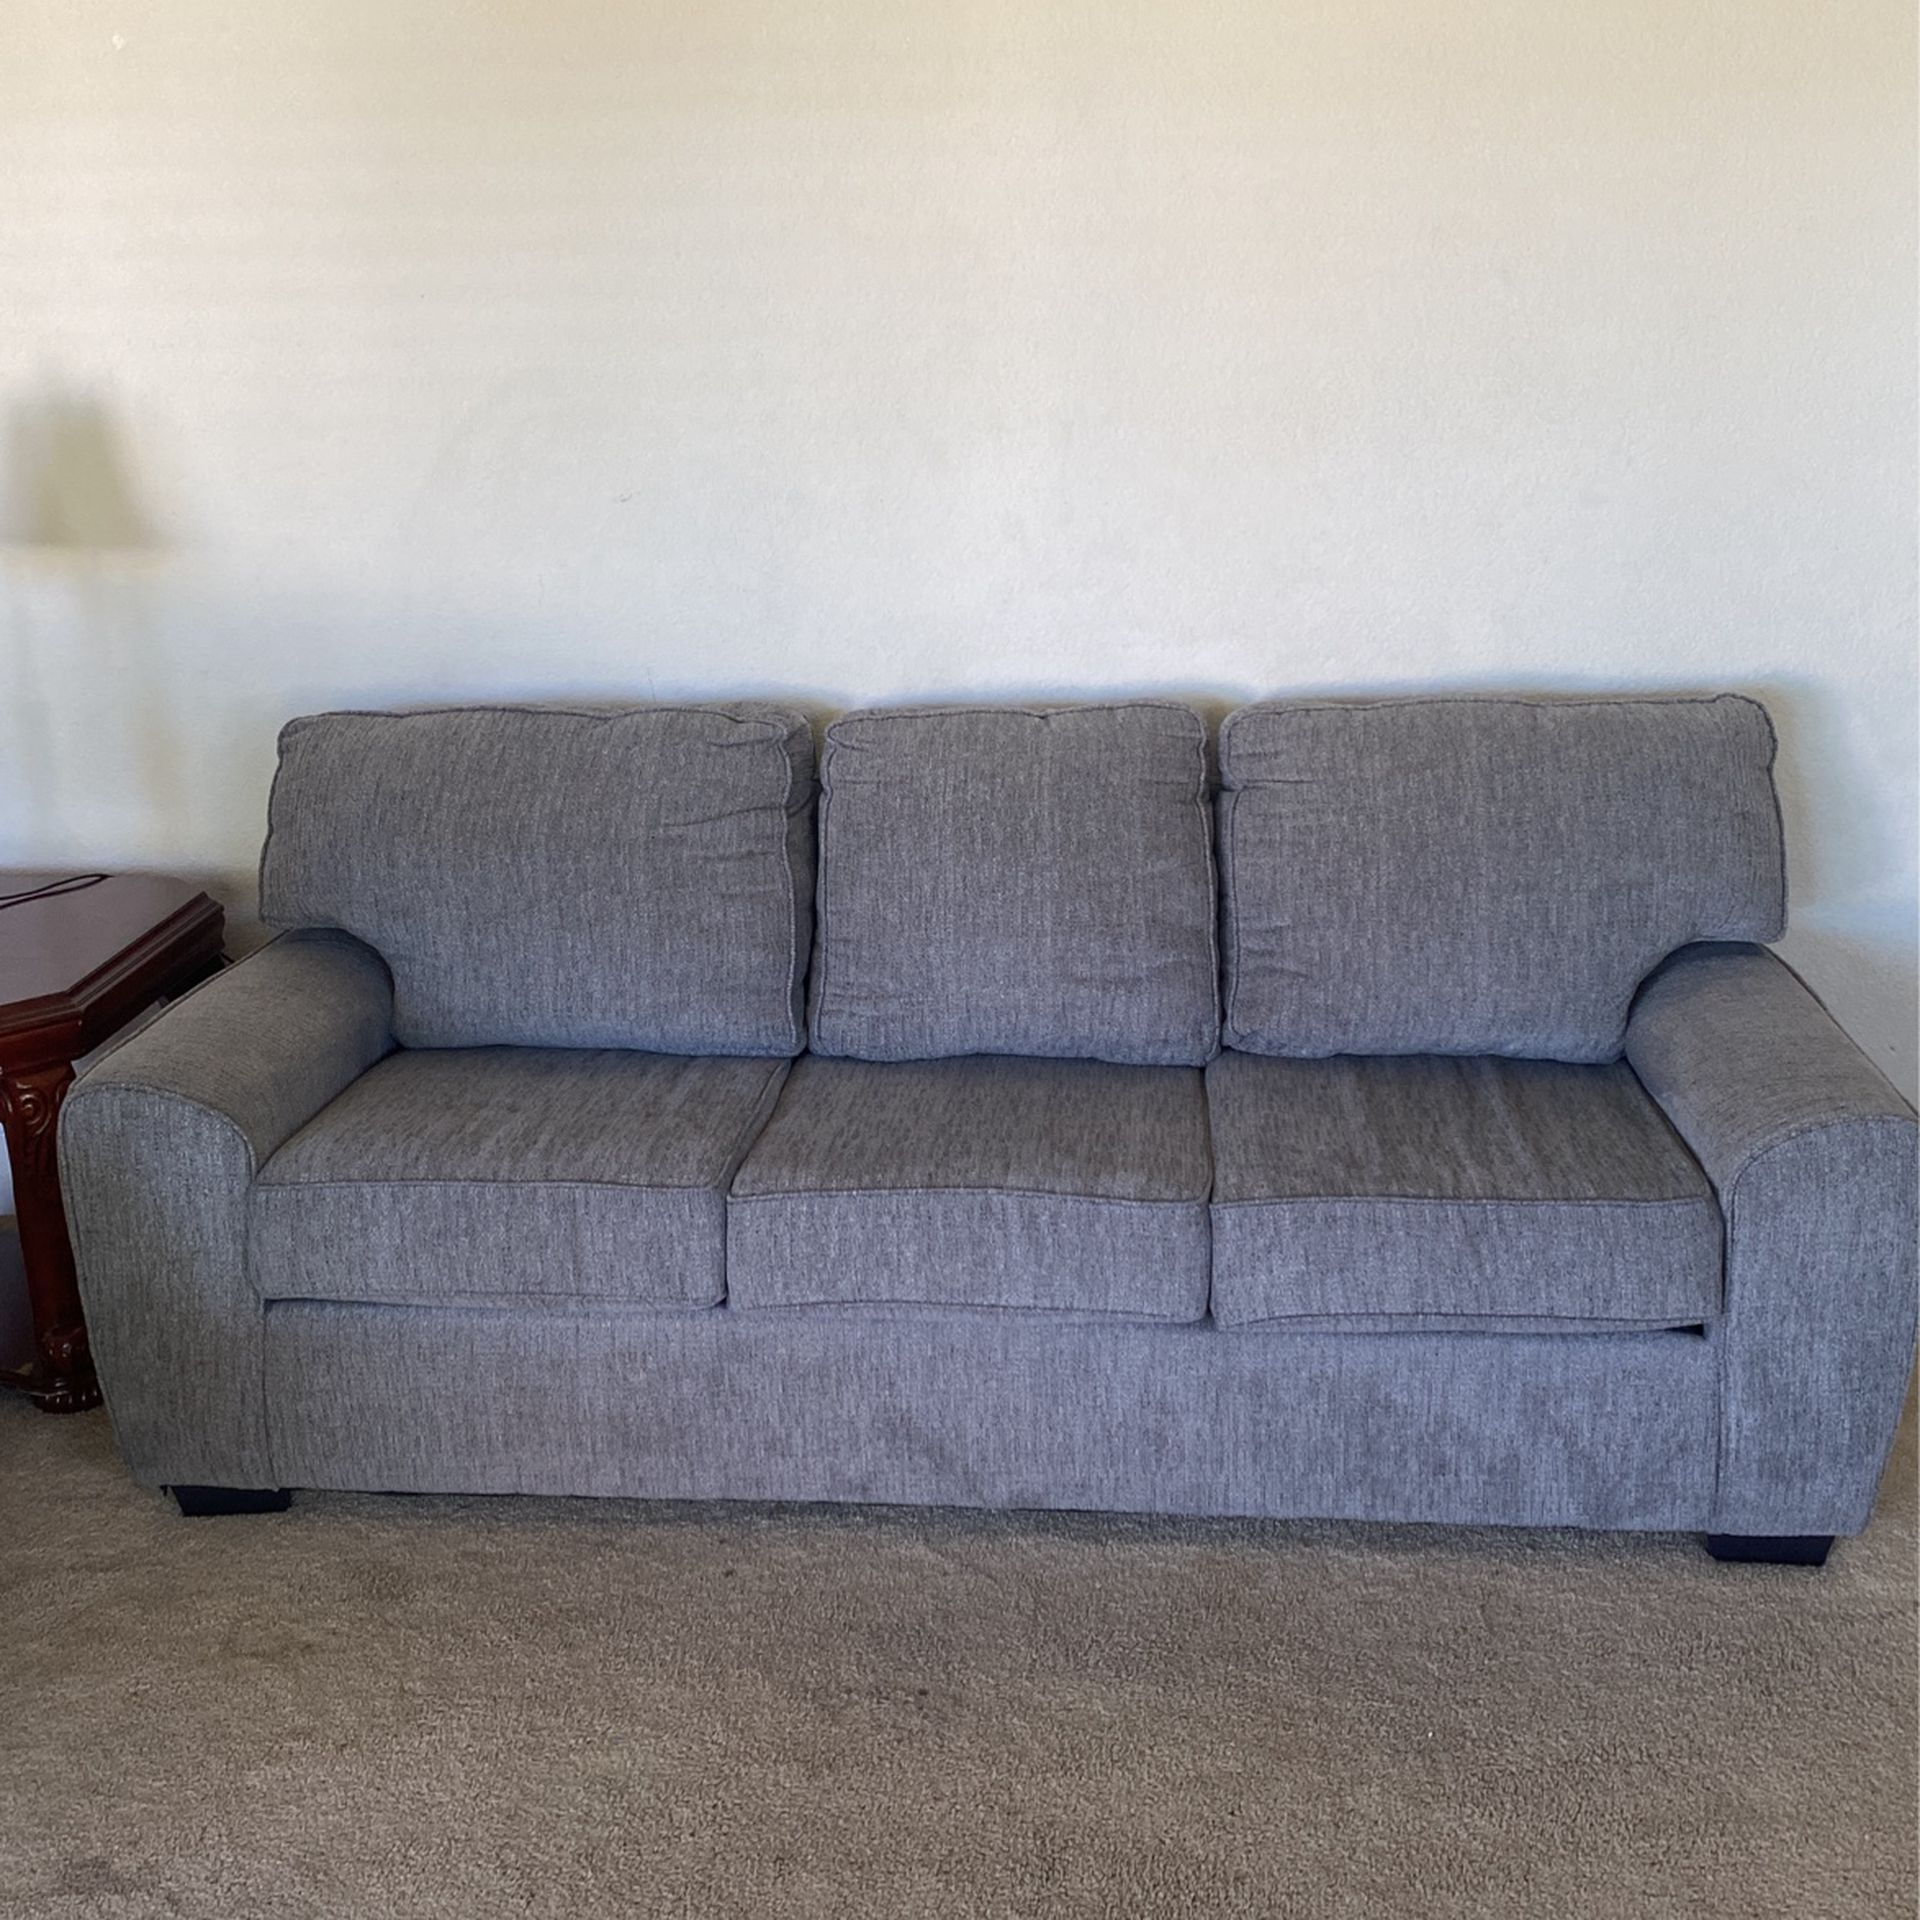 6 Ft Long Grey Couch